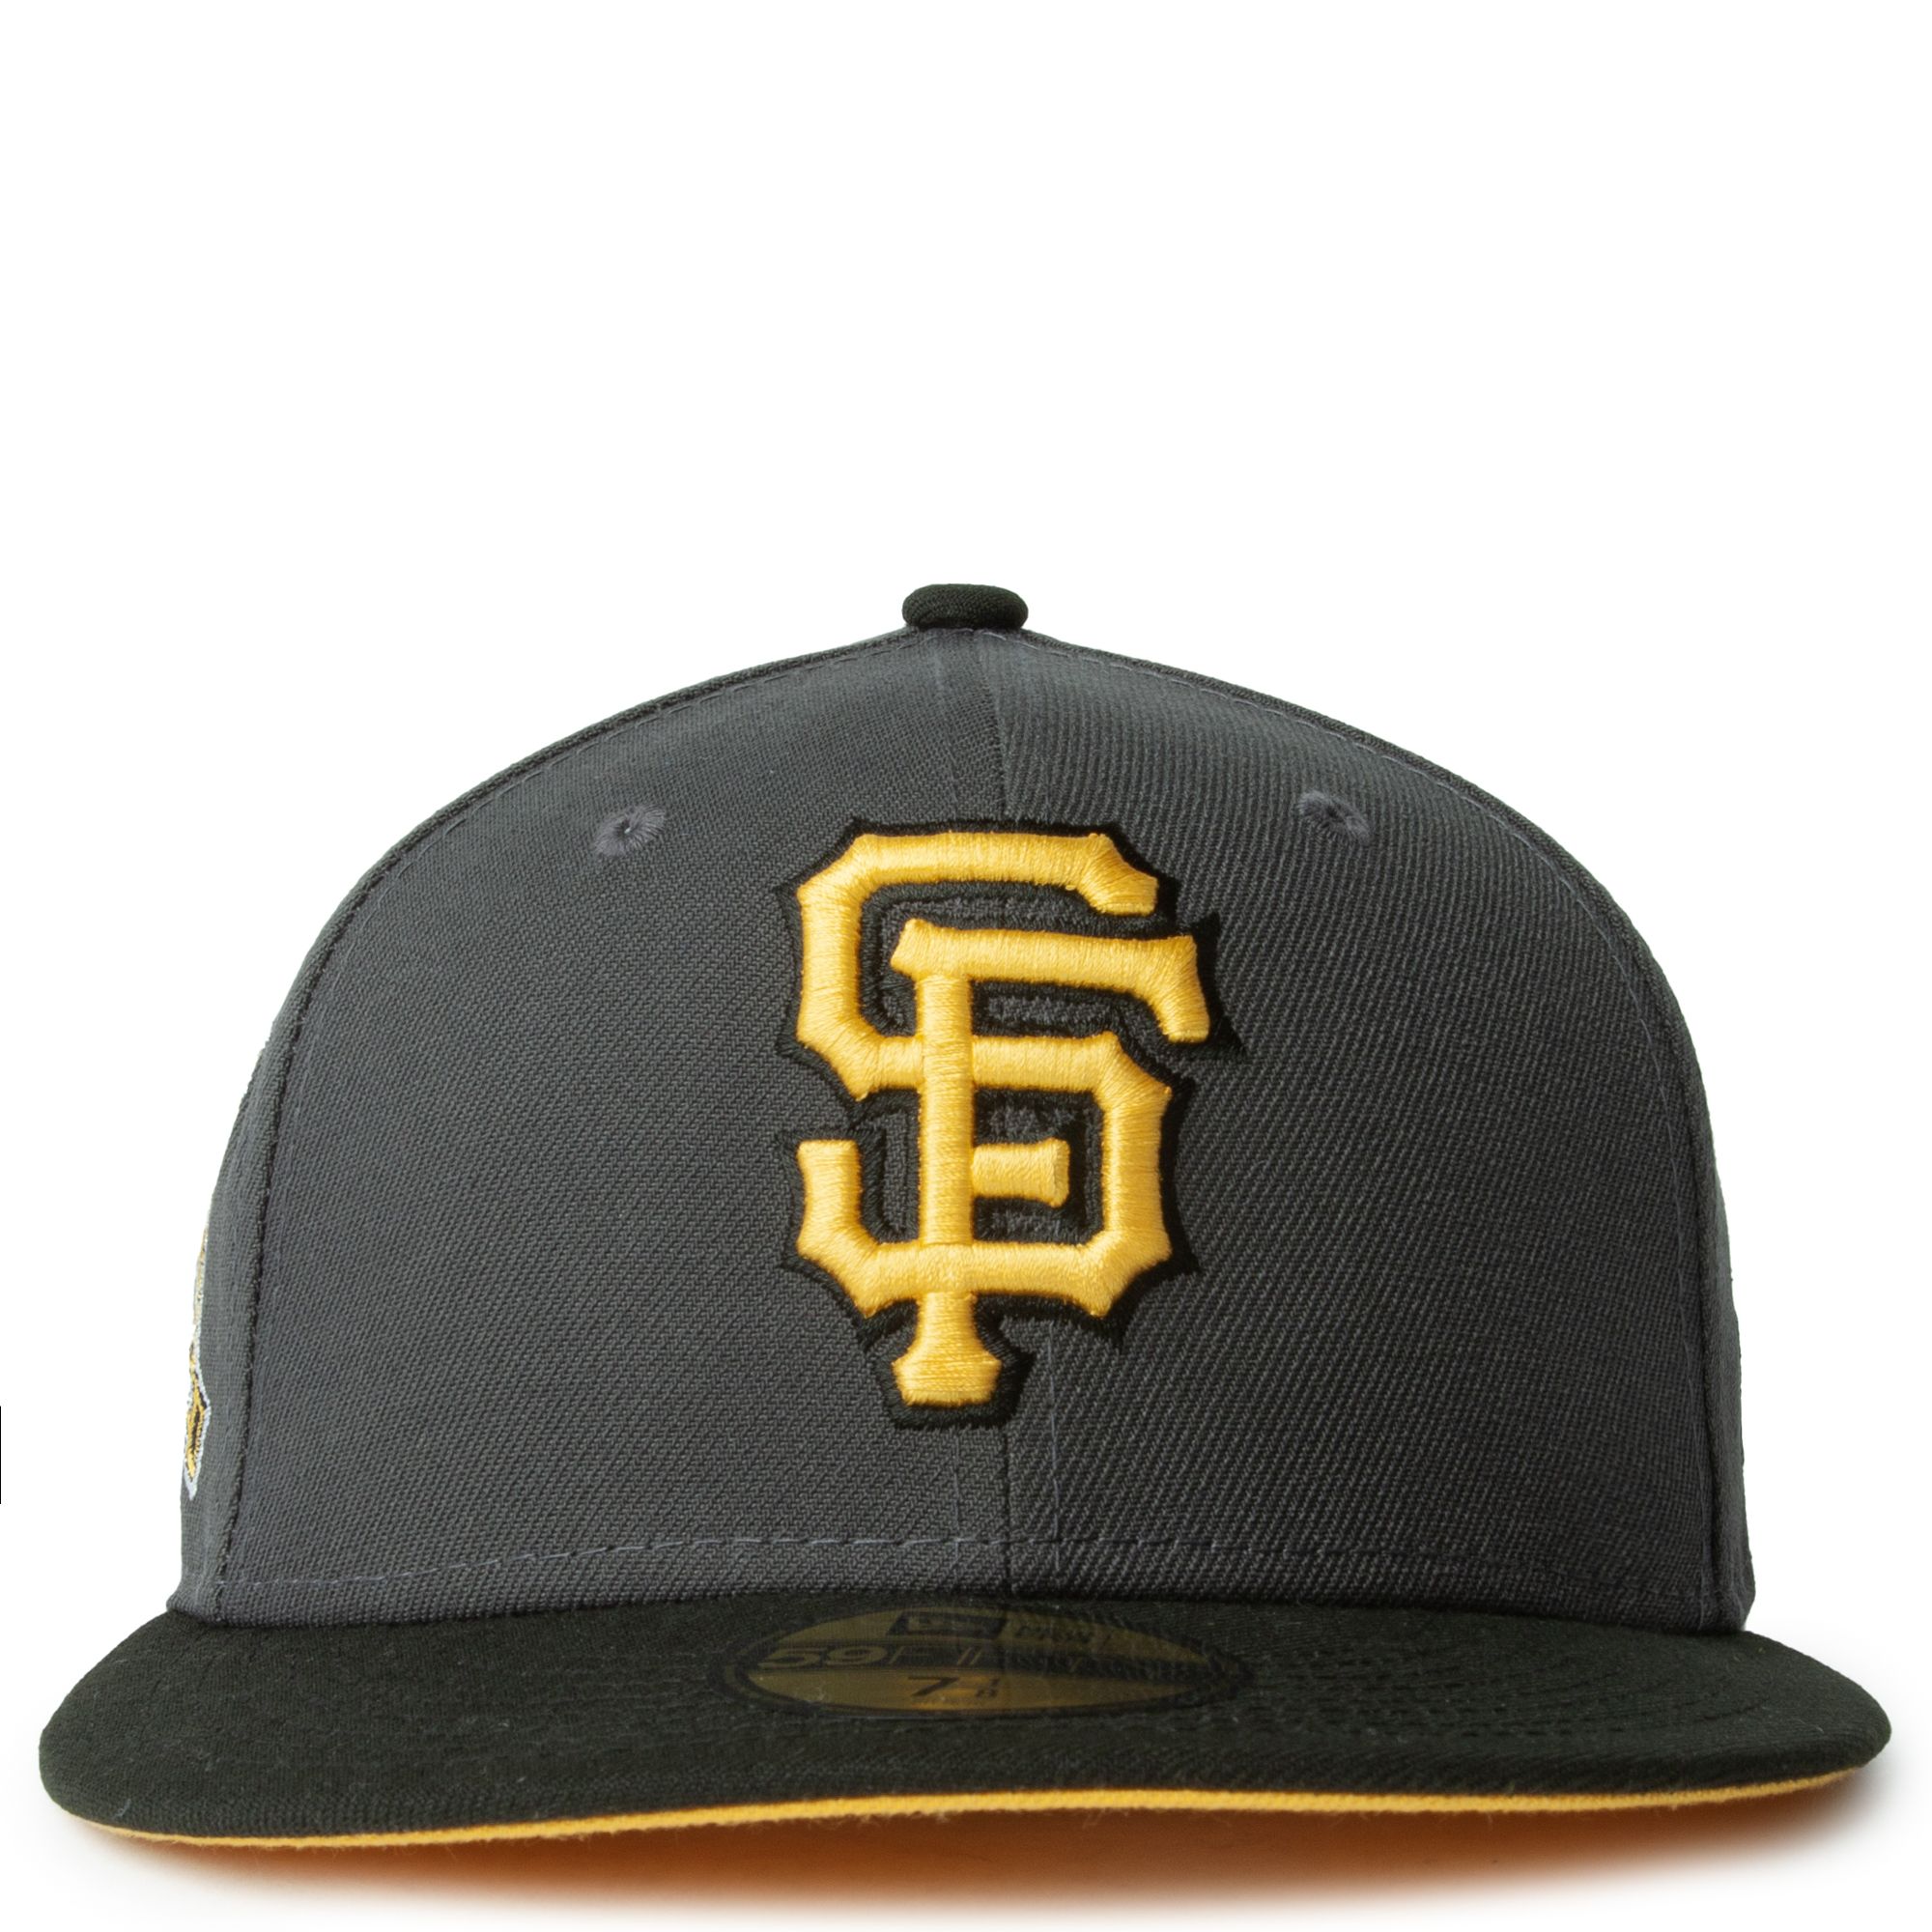 SAN FRANCISCO GIANTS BLACK GRAY 59FIFTY FITTED HAT 70740312